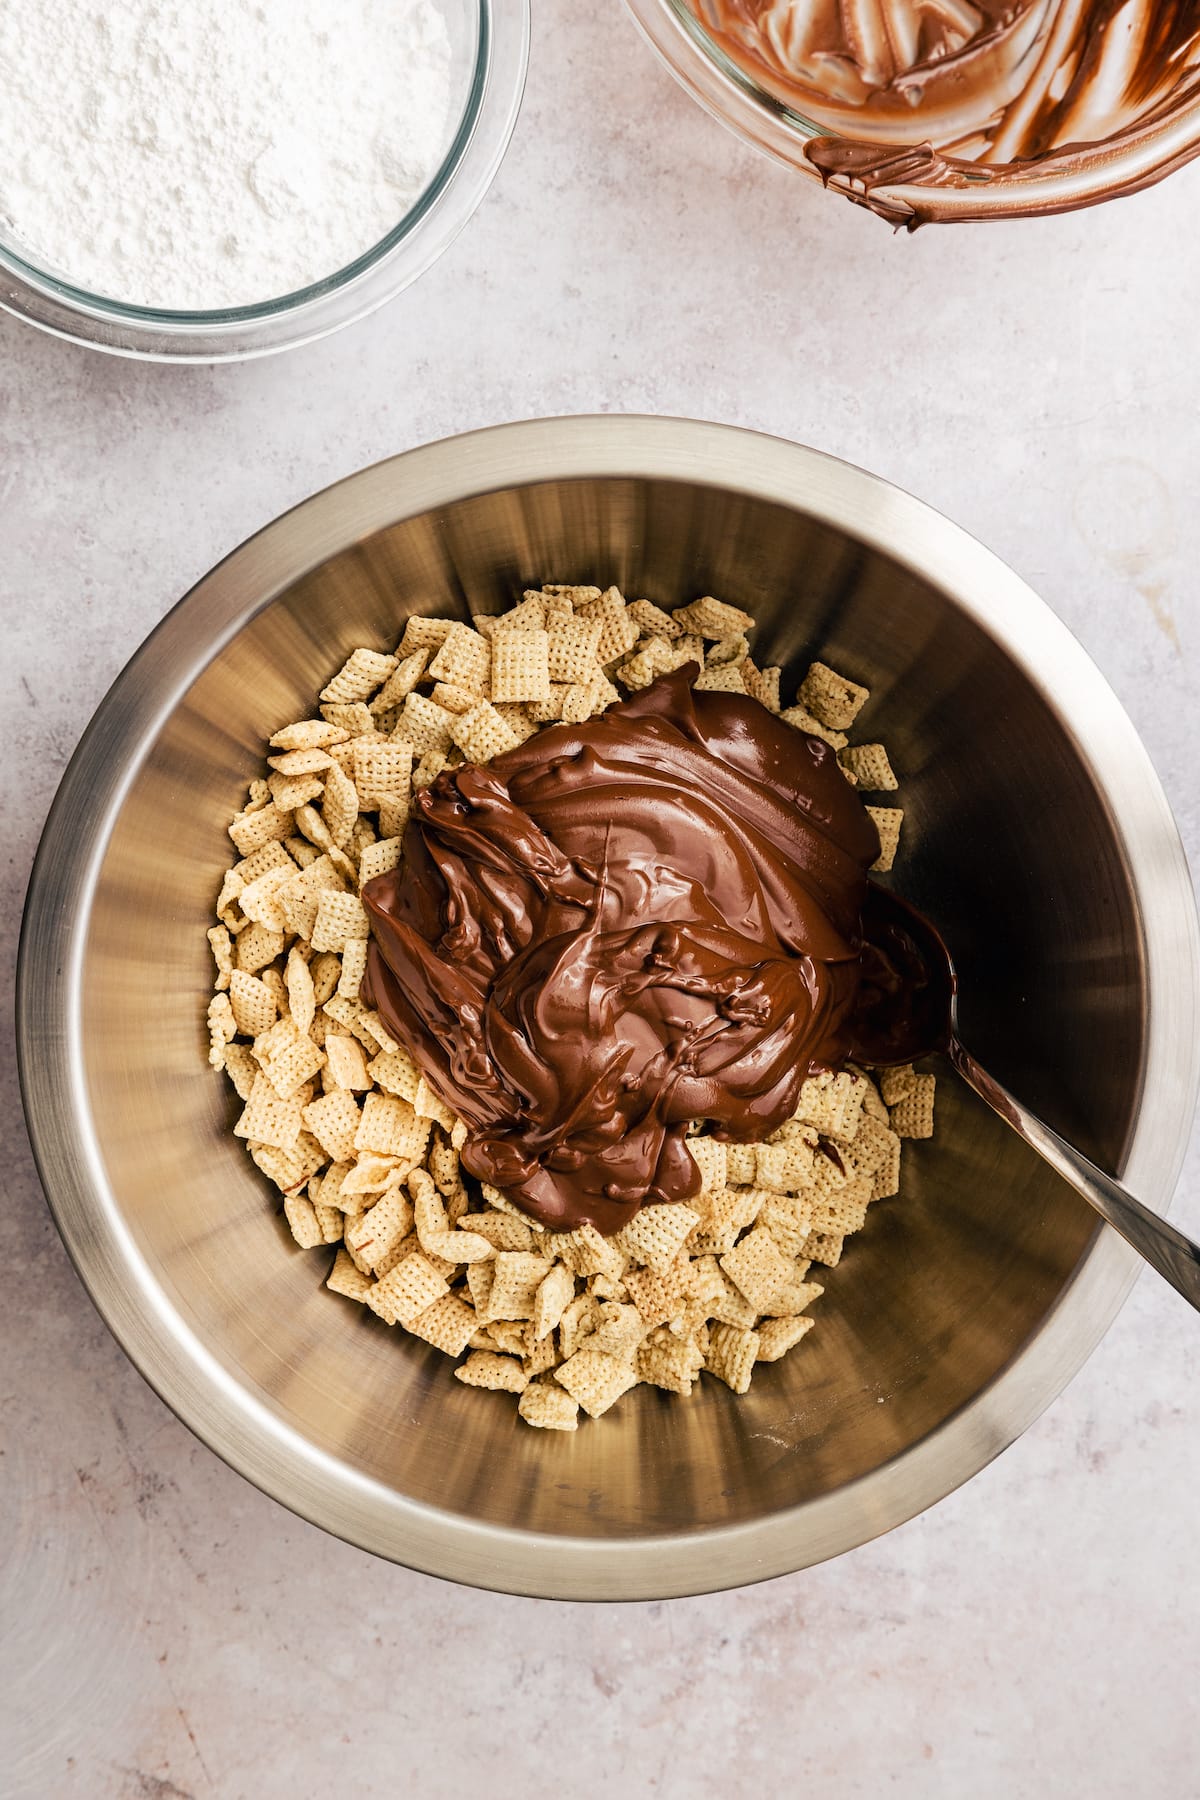 The chocolate peanut butter mixture is added into a large bowl with Chex cereal.